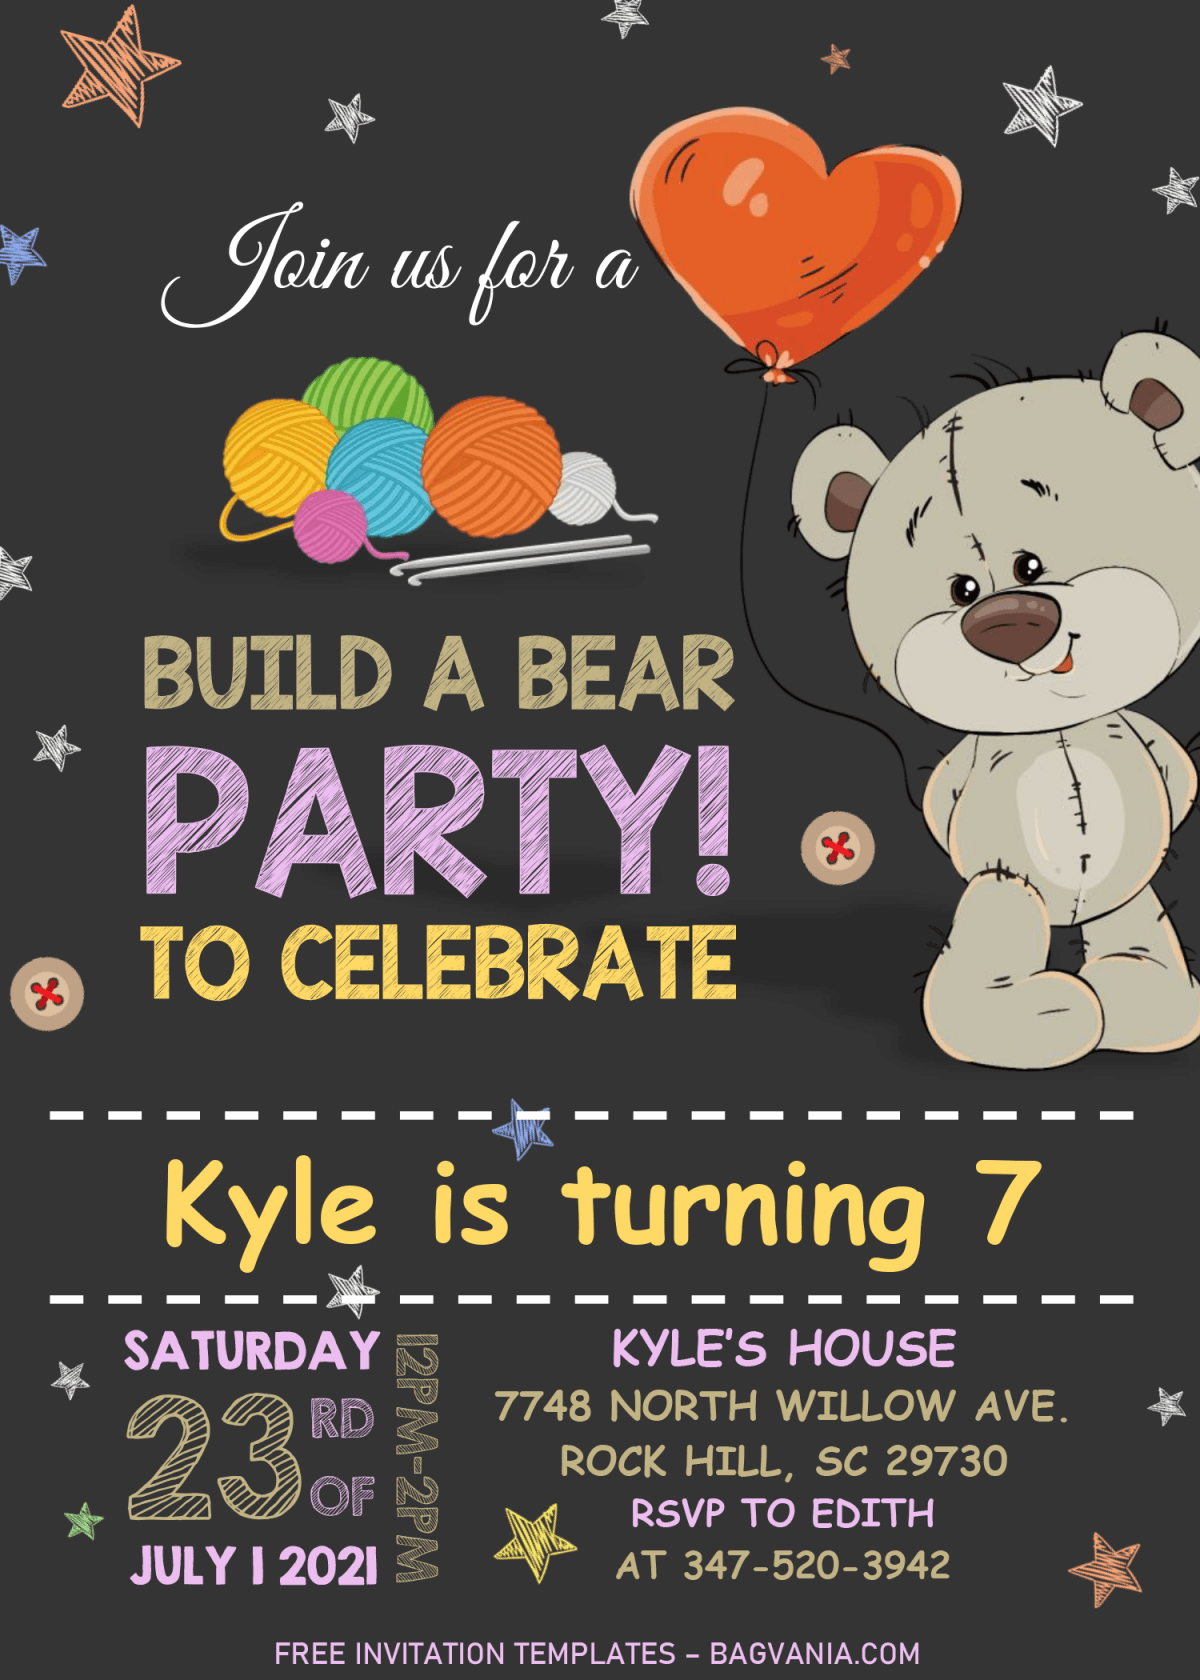 Build A Bear Birthday Invitation Templates - Editable With MS Word and has colorful stars